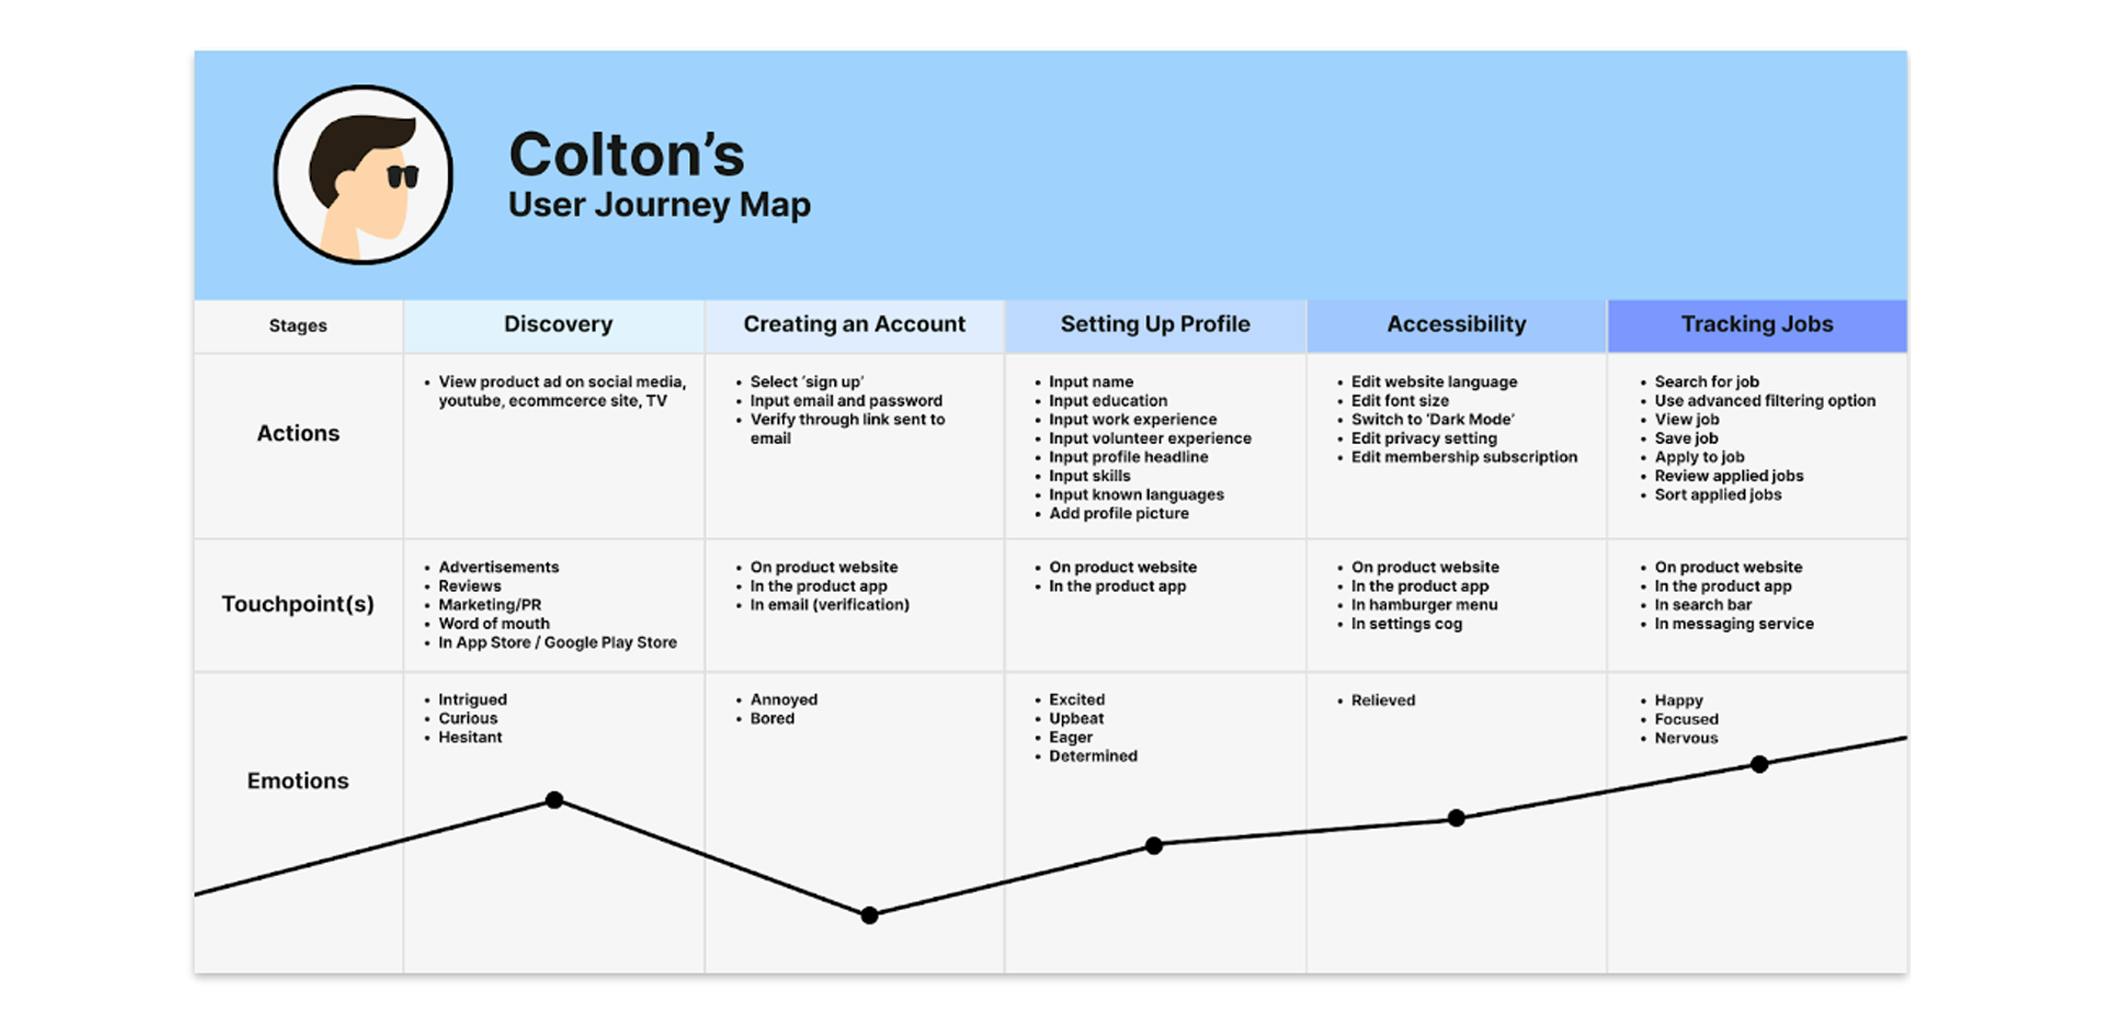 An image of a journey map created to outline the touchpoints and emotions of a user when using JobGator